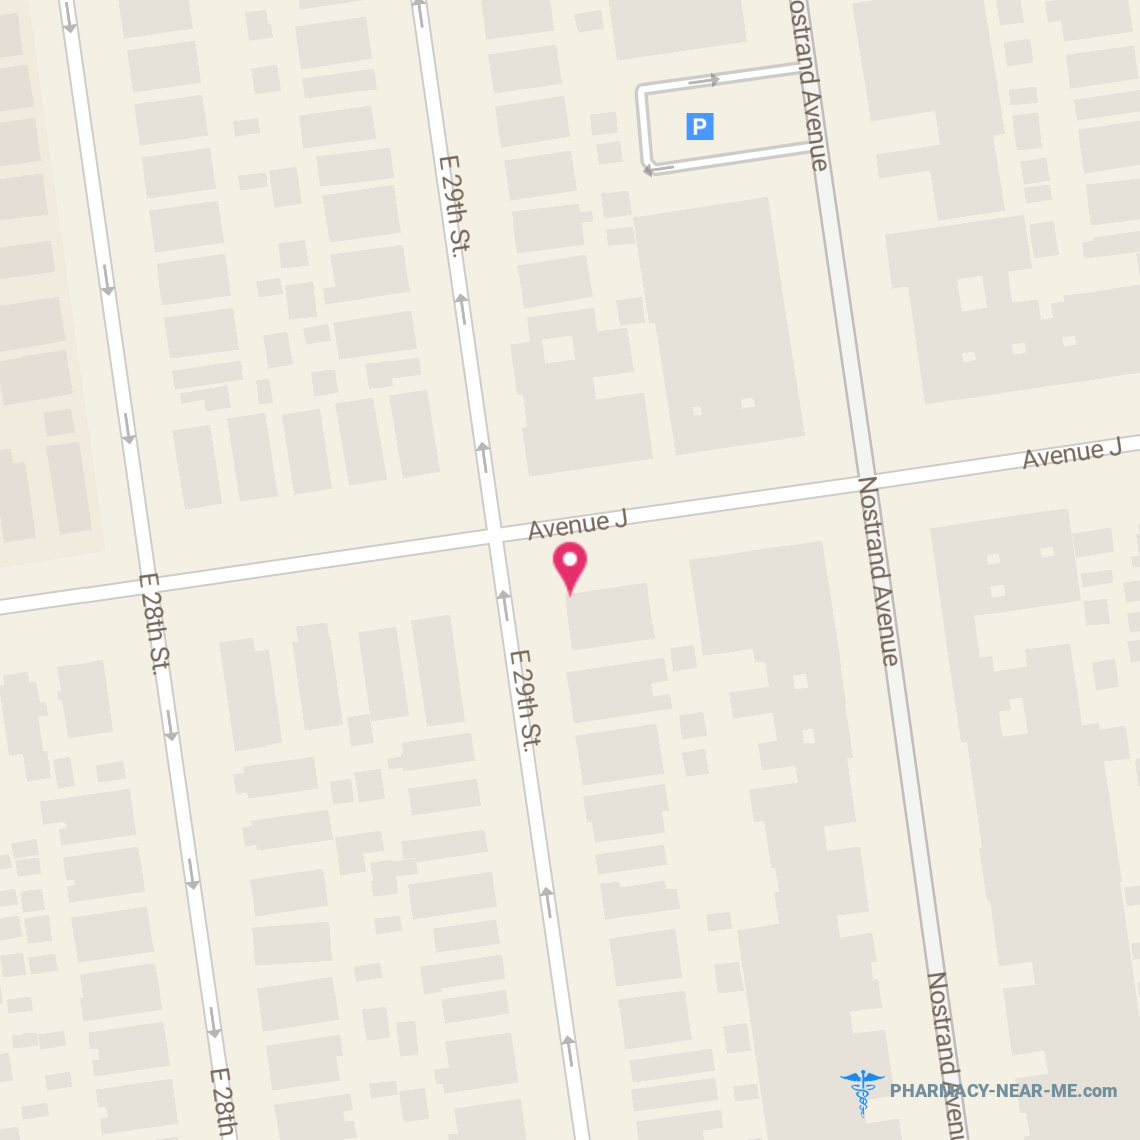 NOSTRAND DRUG CORP. - Pharmacy Hours, Phone, Reviews & Information: 2918 Avenue J, Brooklyn, New York 11210, United States